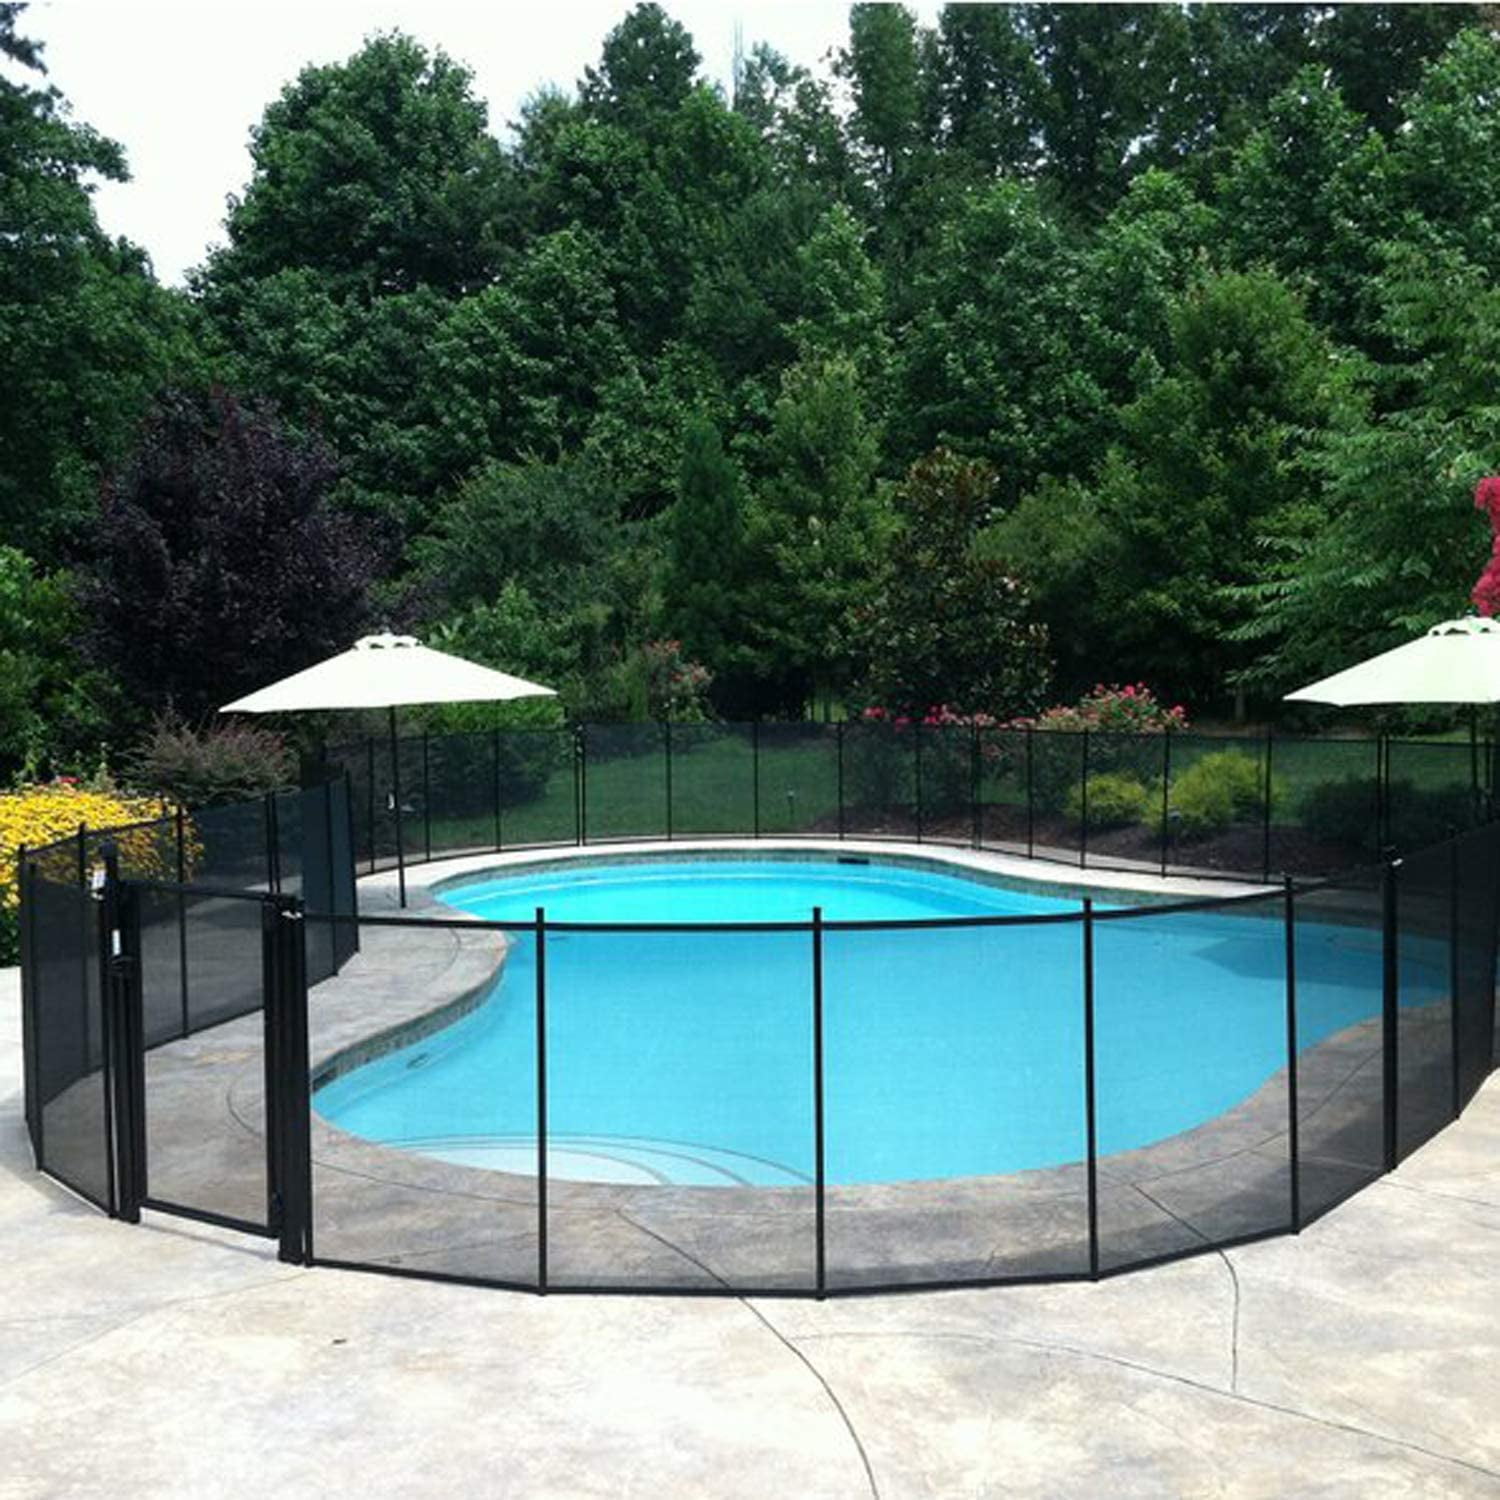 Pool Fence DIY by Life Saver Fencing Section Kit 4 X 12 Feet for sale online 